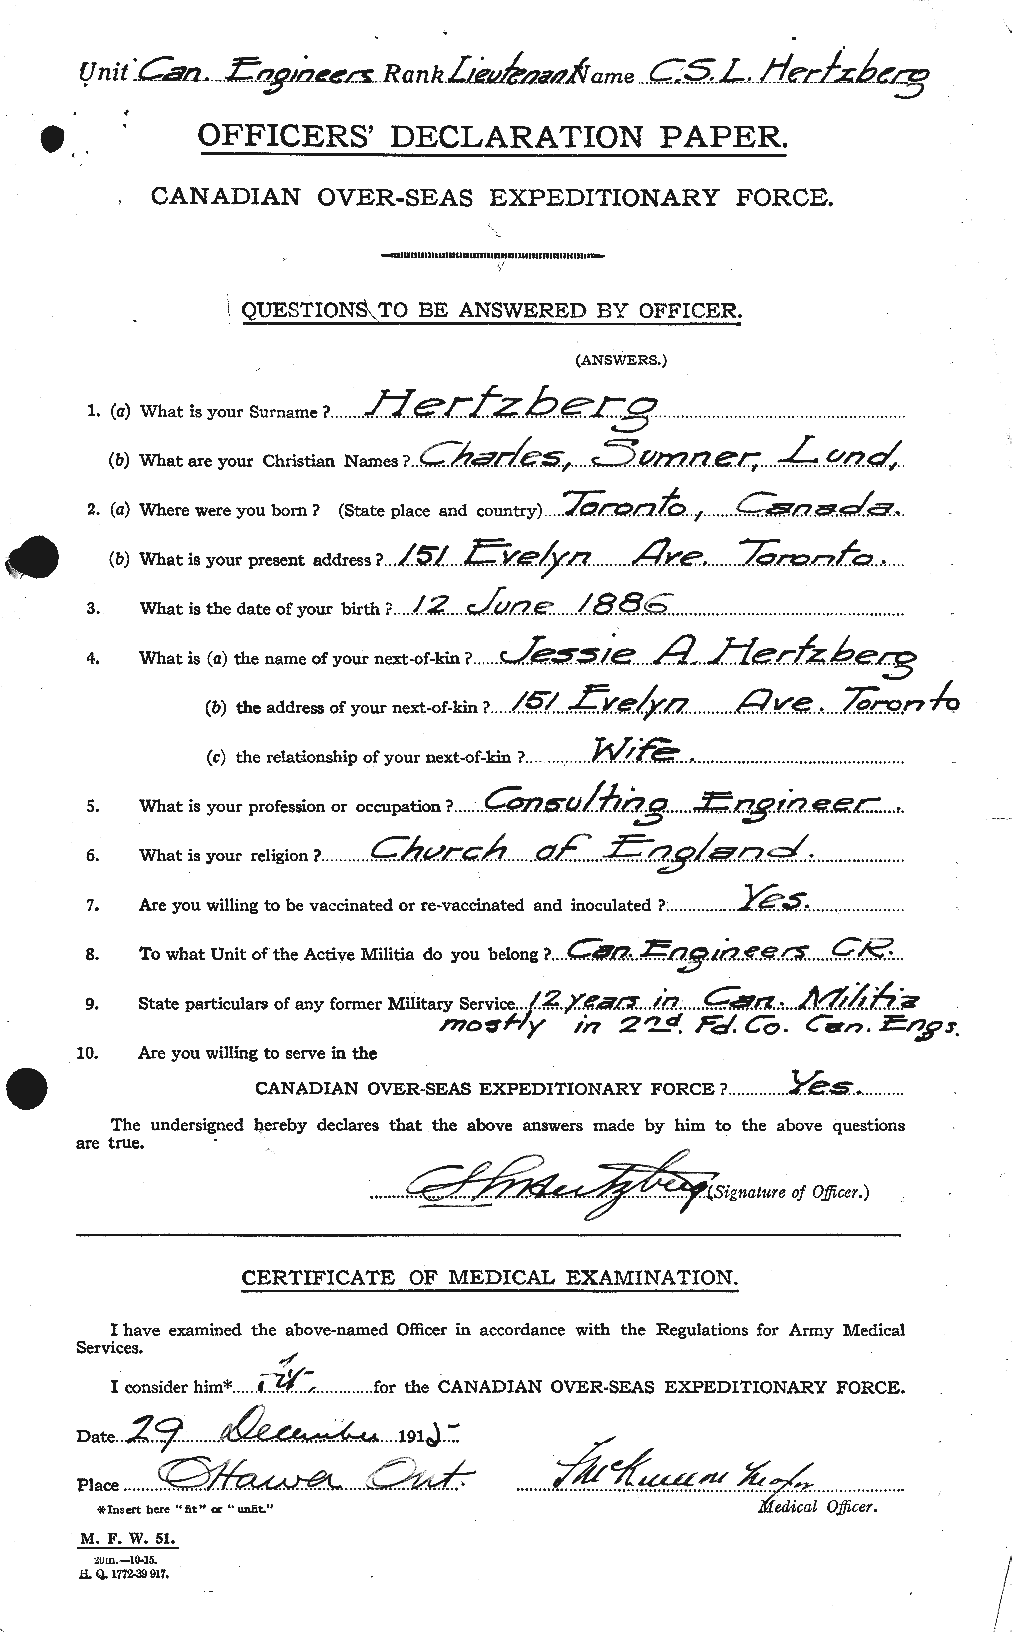 Personnel Records of the First World War - CEF 390453a